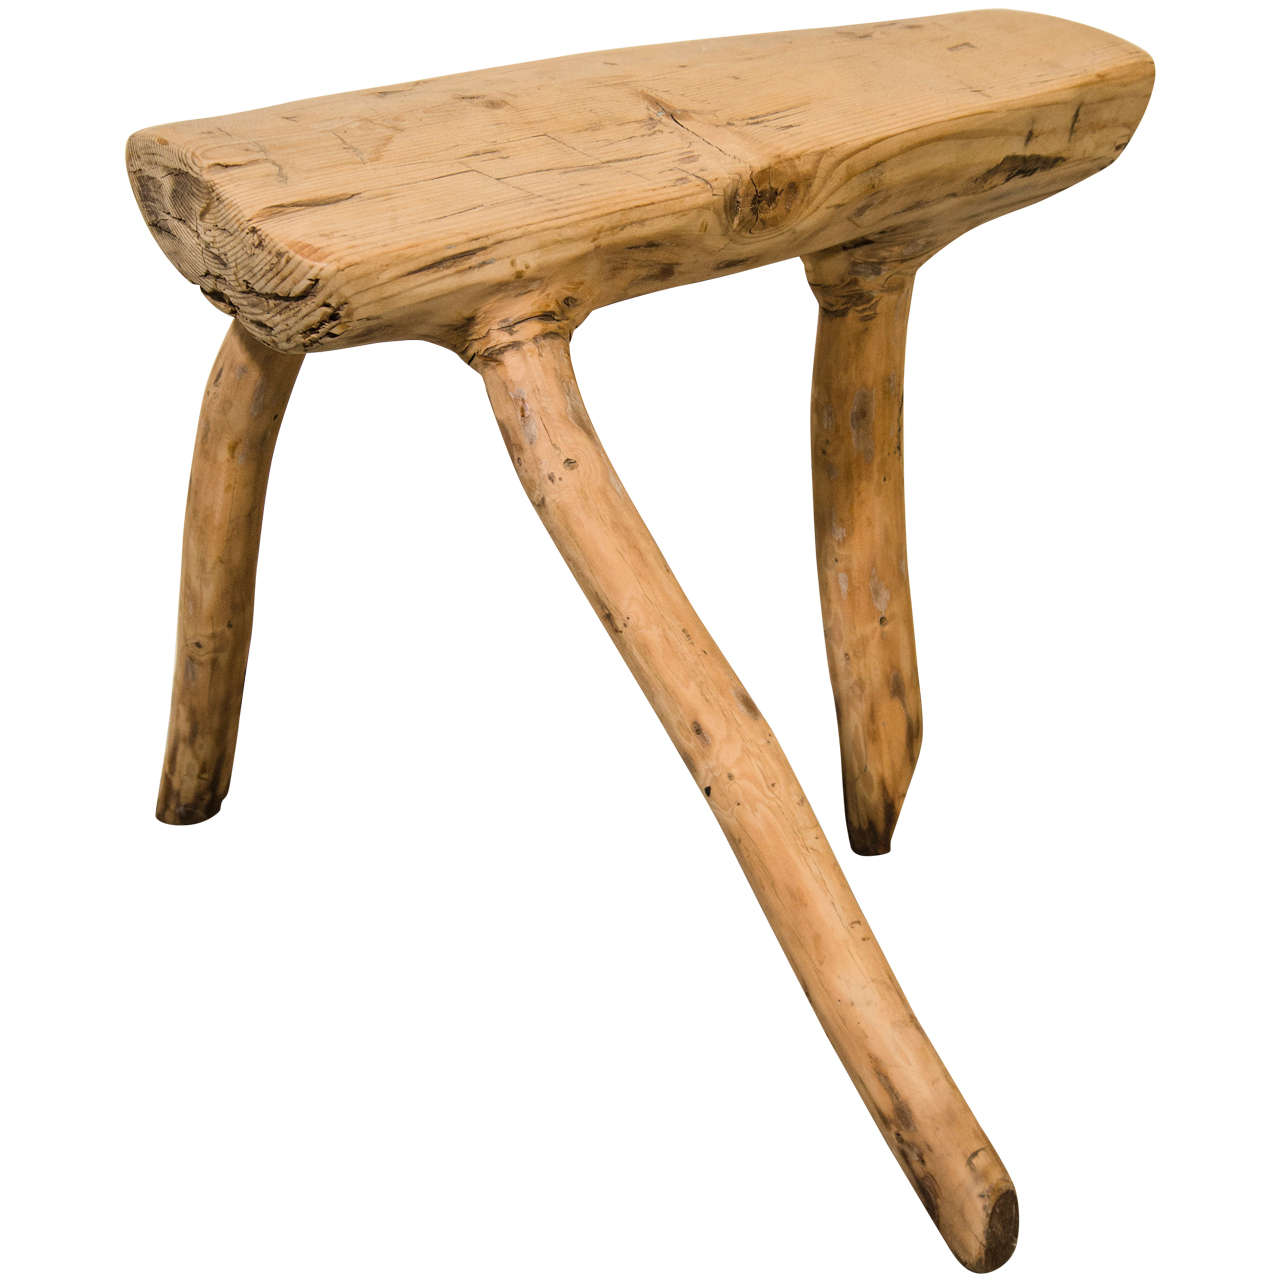 Quirky Antique Stool